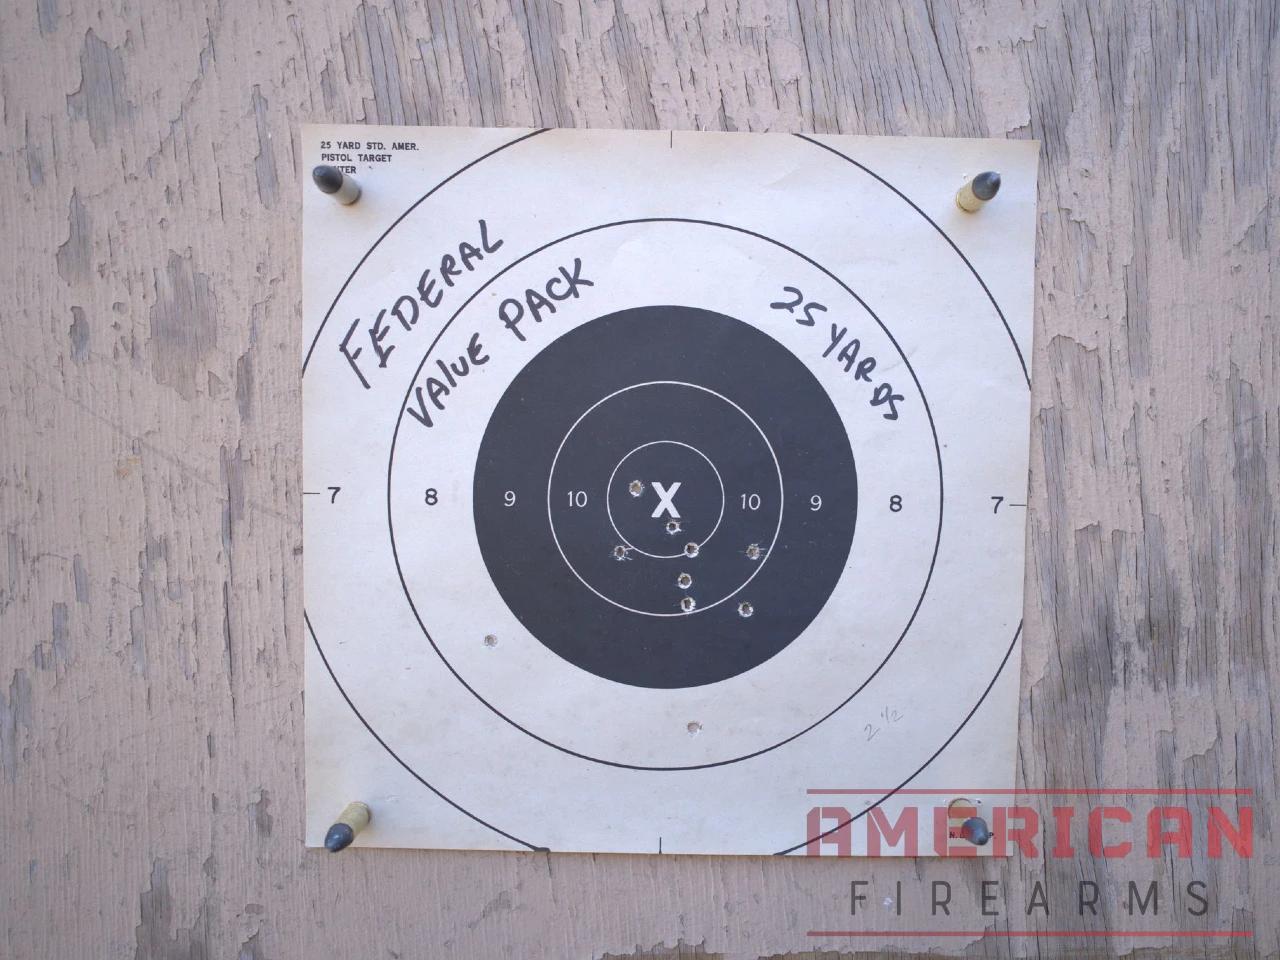 The Federal Value Pack groups were fair at 25 yards.